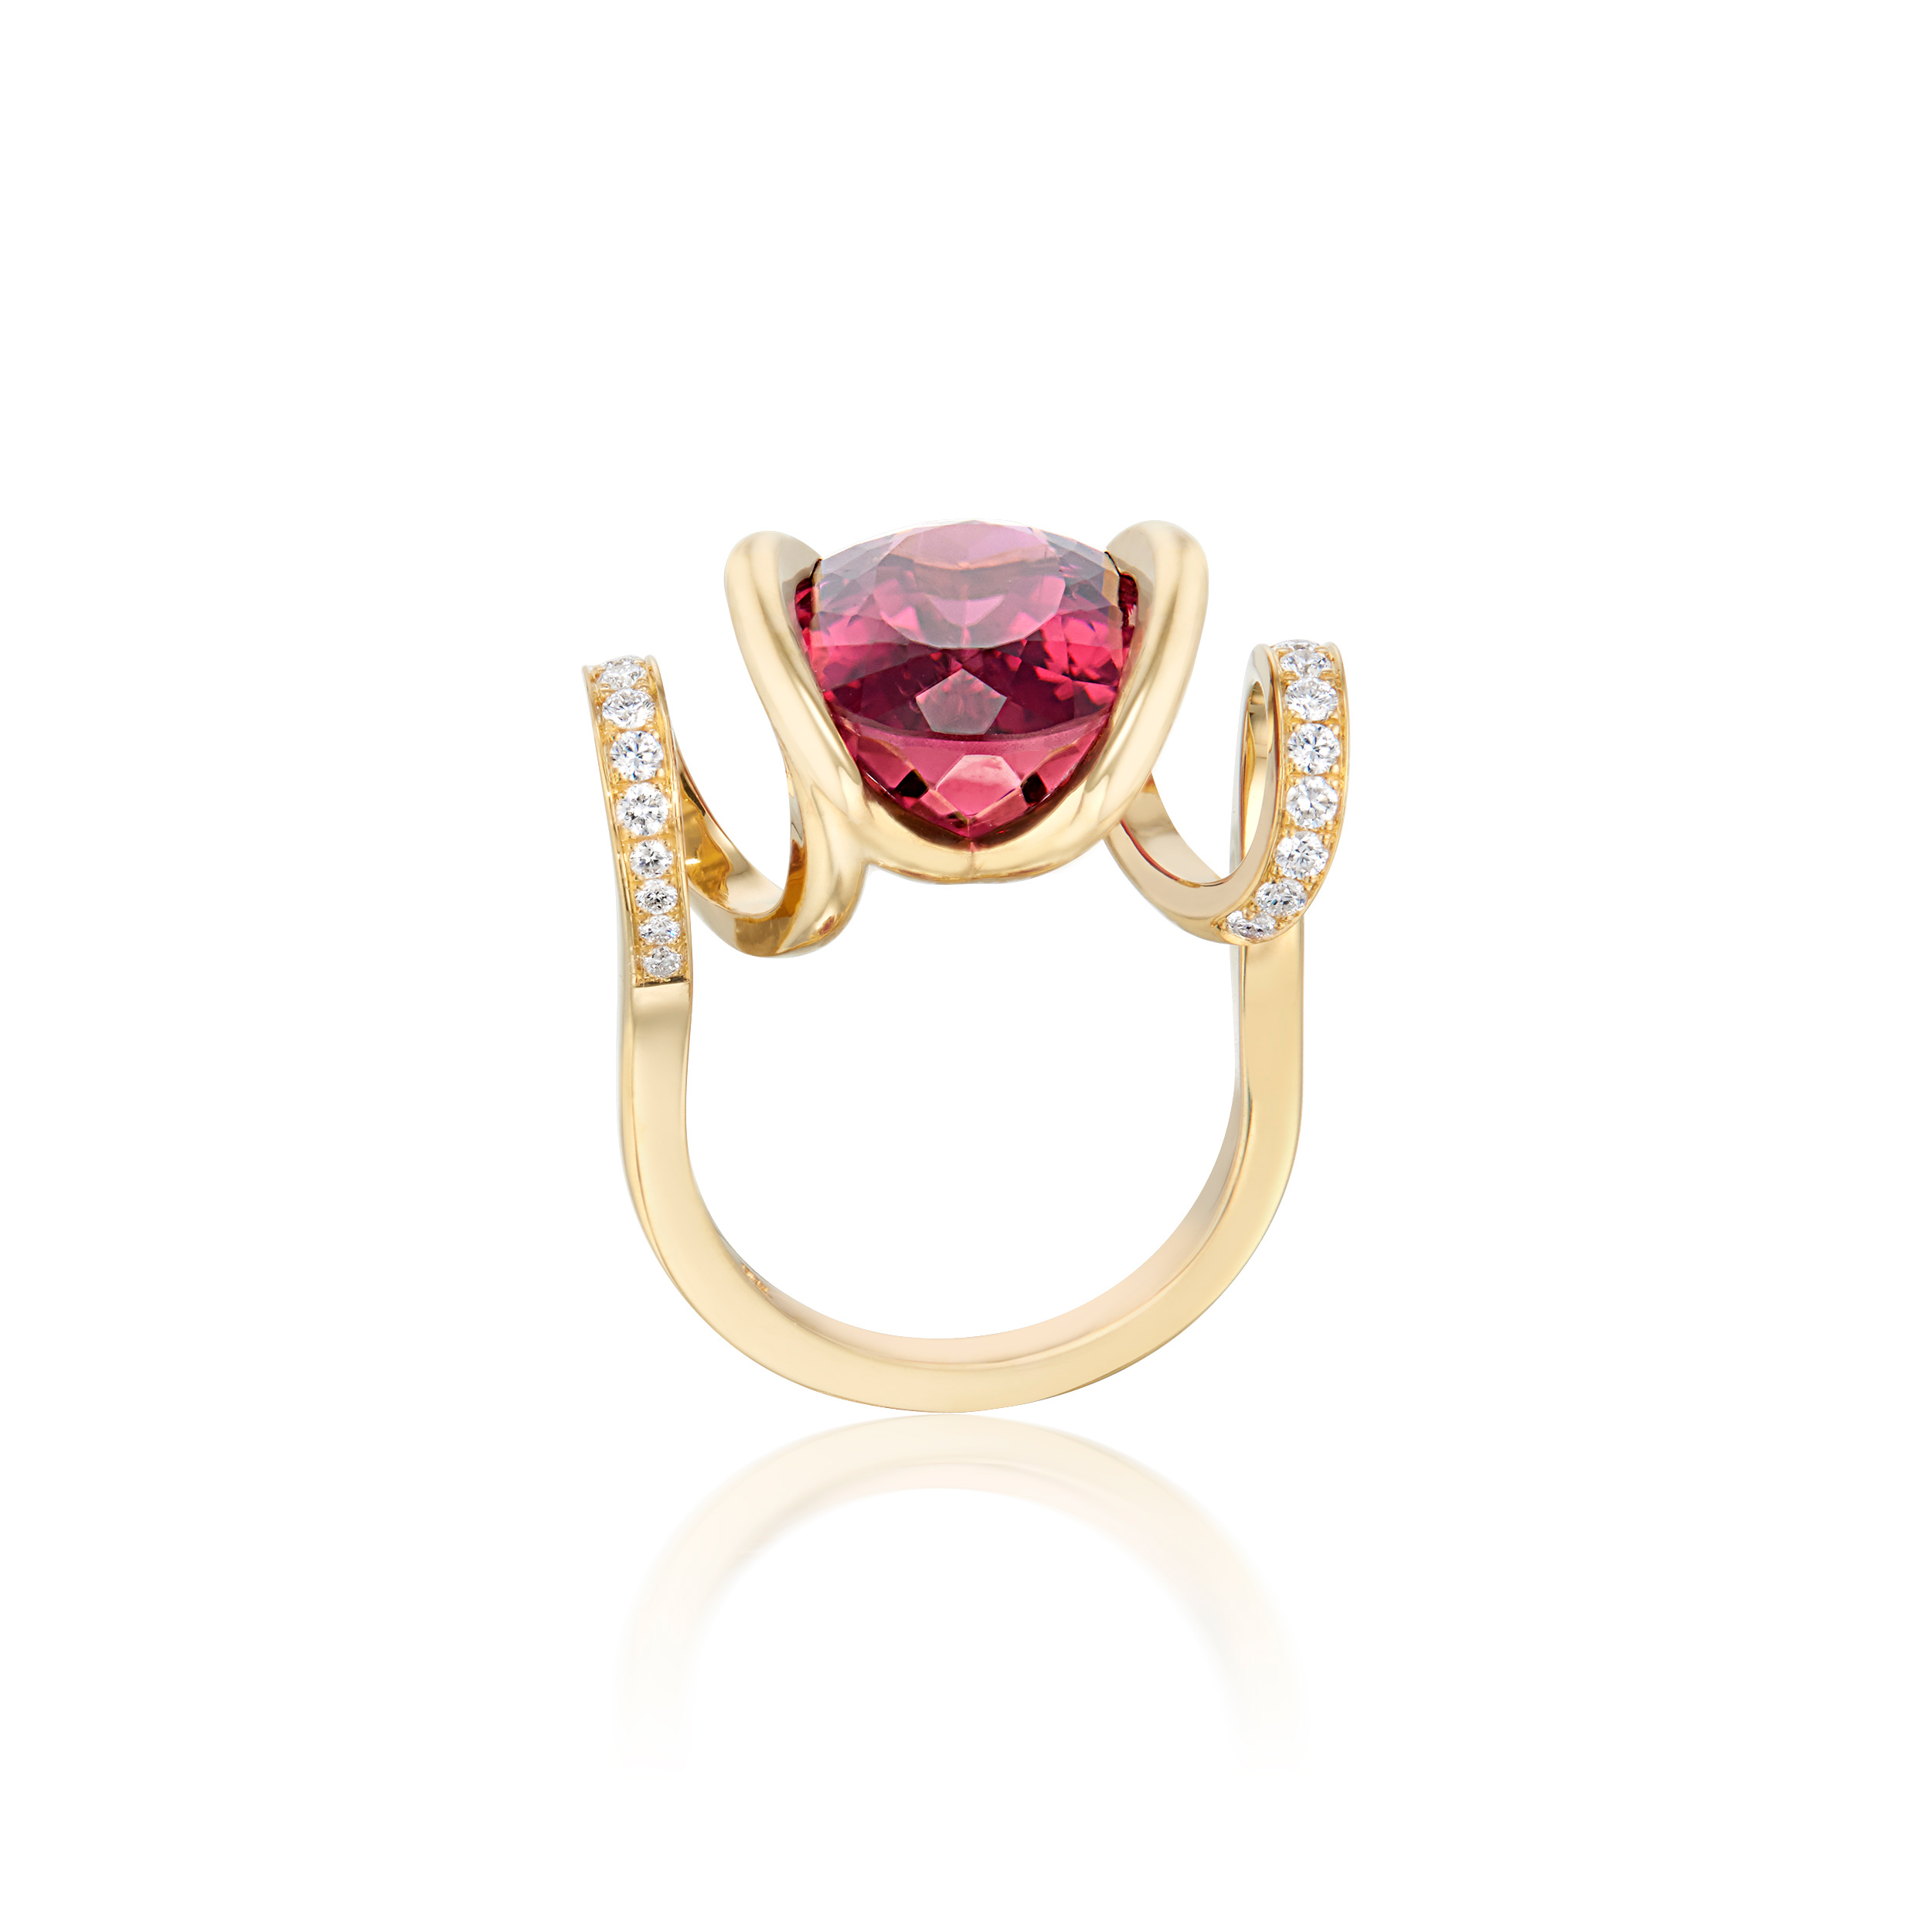 This is a front standing view of the Renisis Fire Curl Ring with pink tourmaline center and 18K yellow gold with pavé diamonds. Here, you can see the design's symmetry. Its unique design featured a curled body and setting.